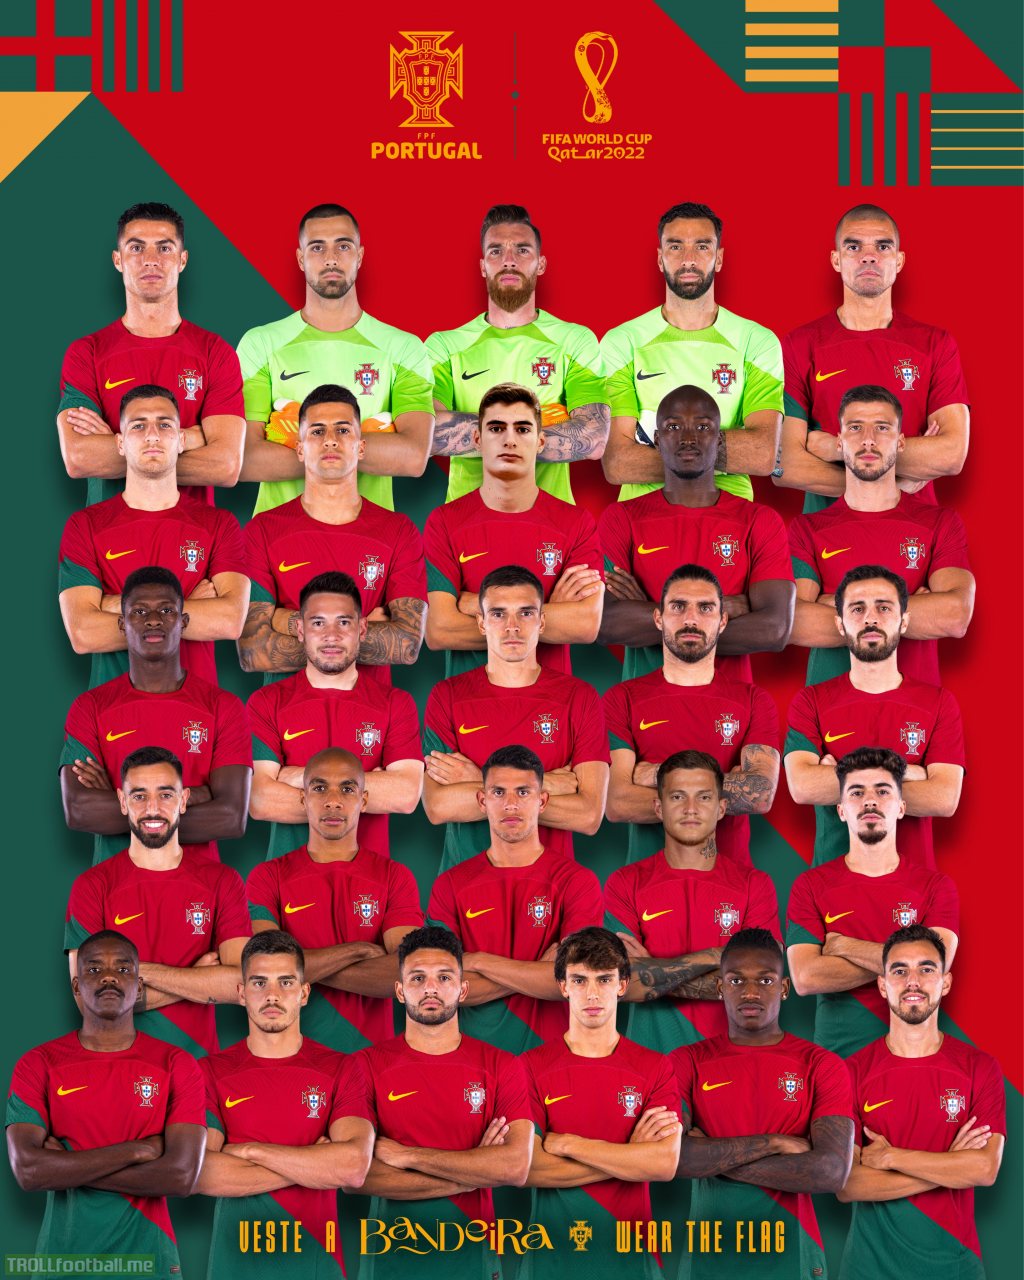 Portugal's squad for the World Cup